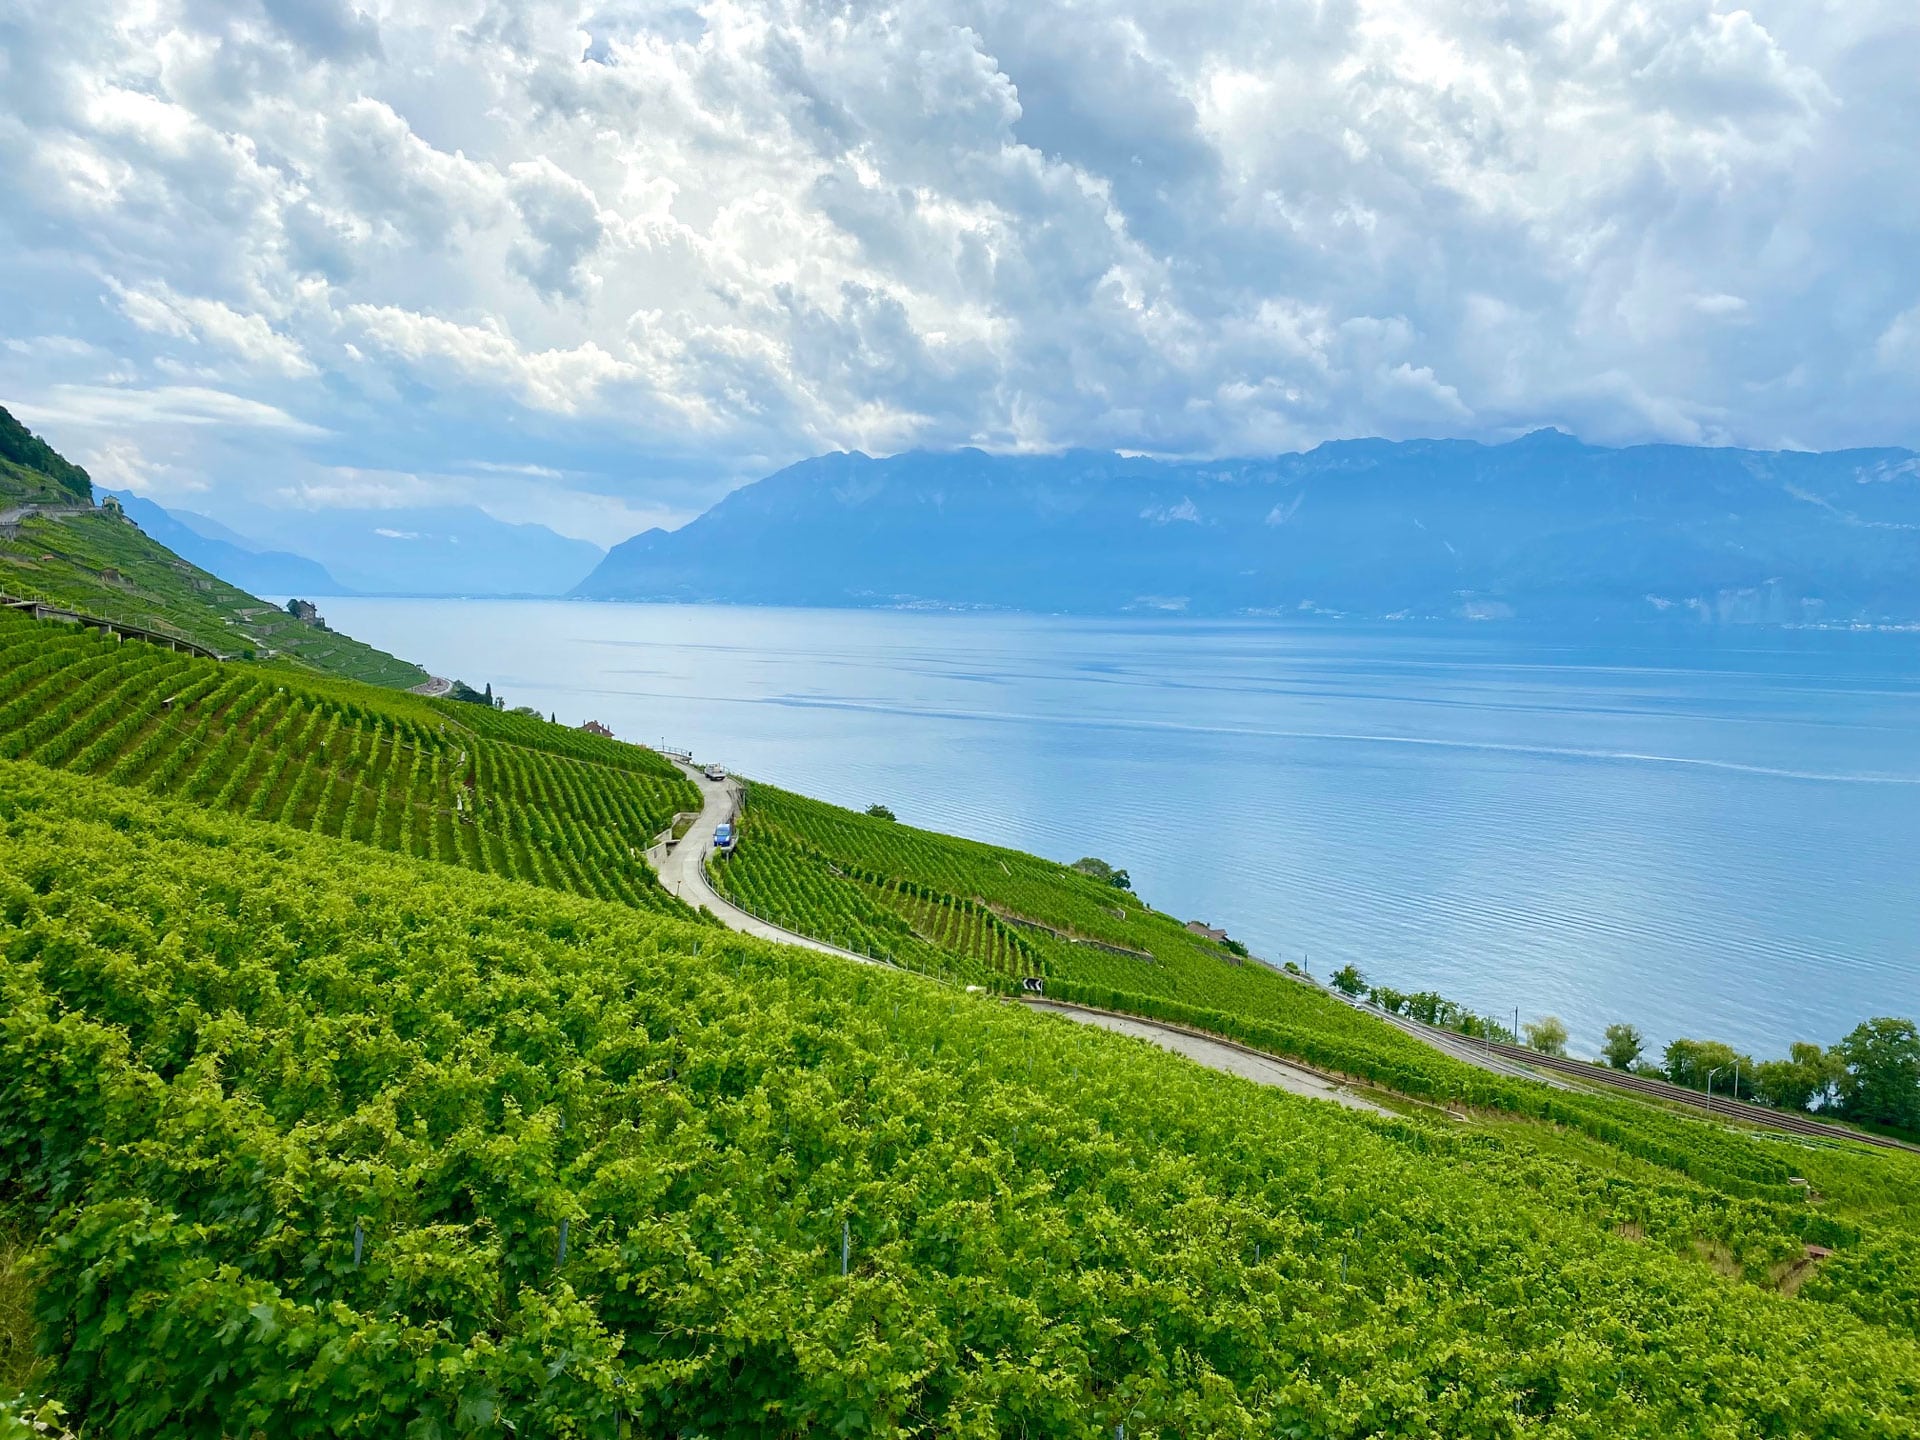 Western Switzerland 2 Days Private Tour – Between must-see places & hidden gems – Montreux, Vineyards & Grand Canyon of Switzerland (Basel)